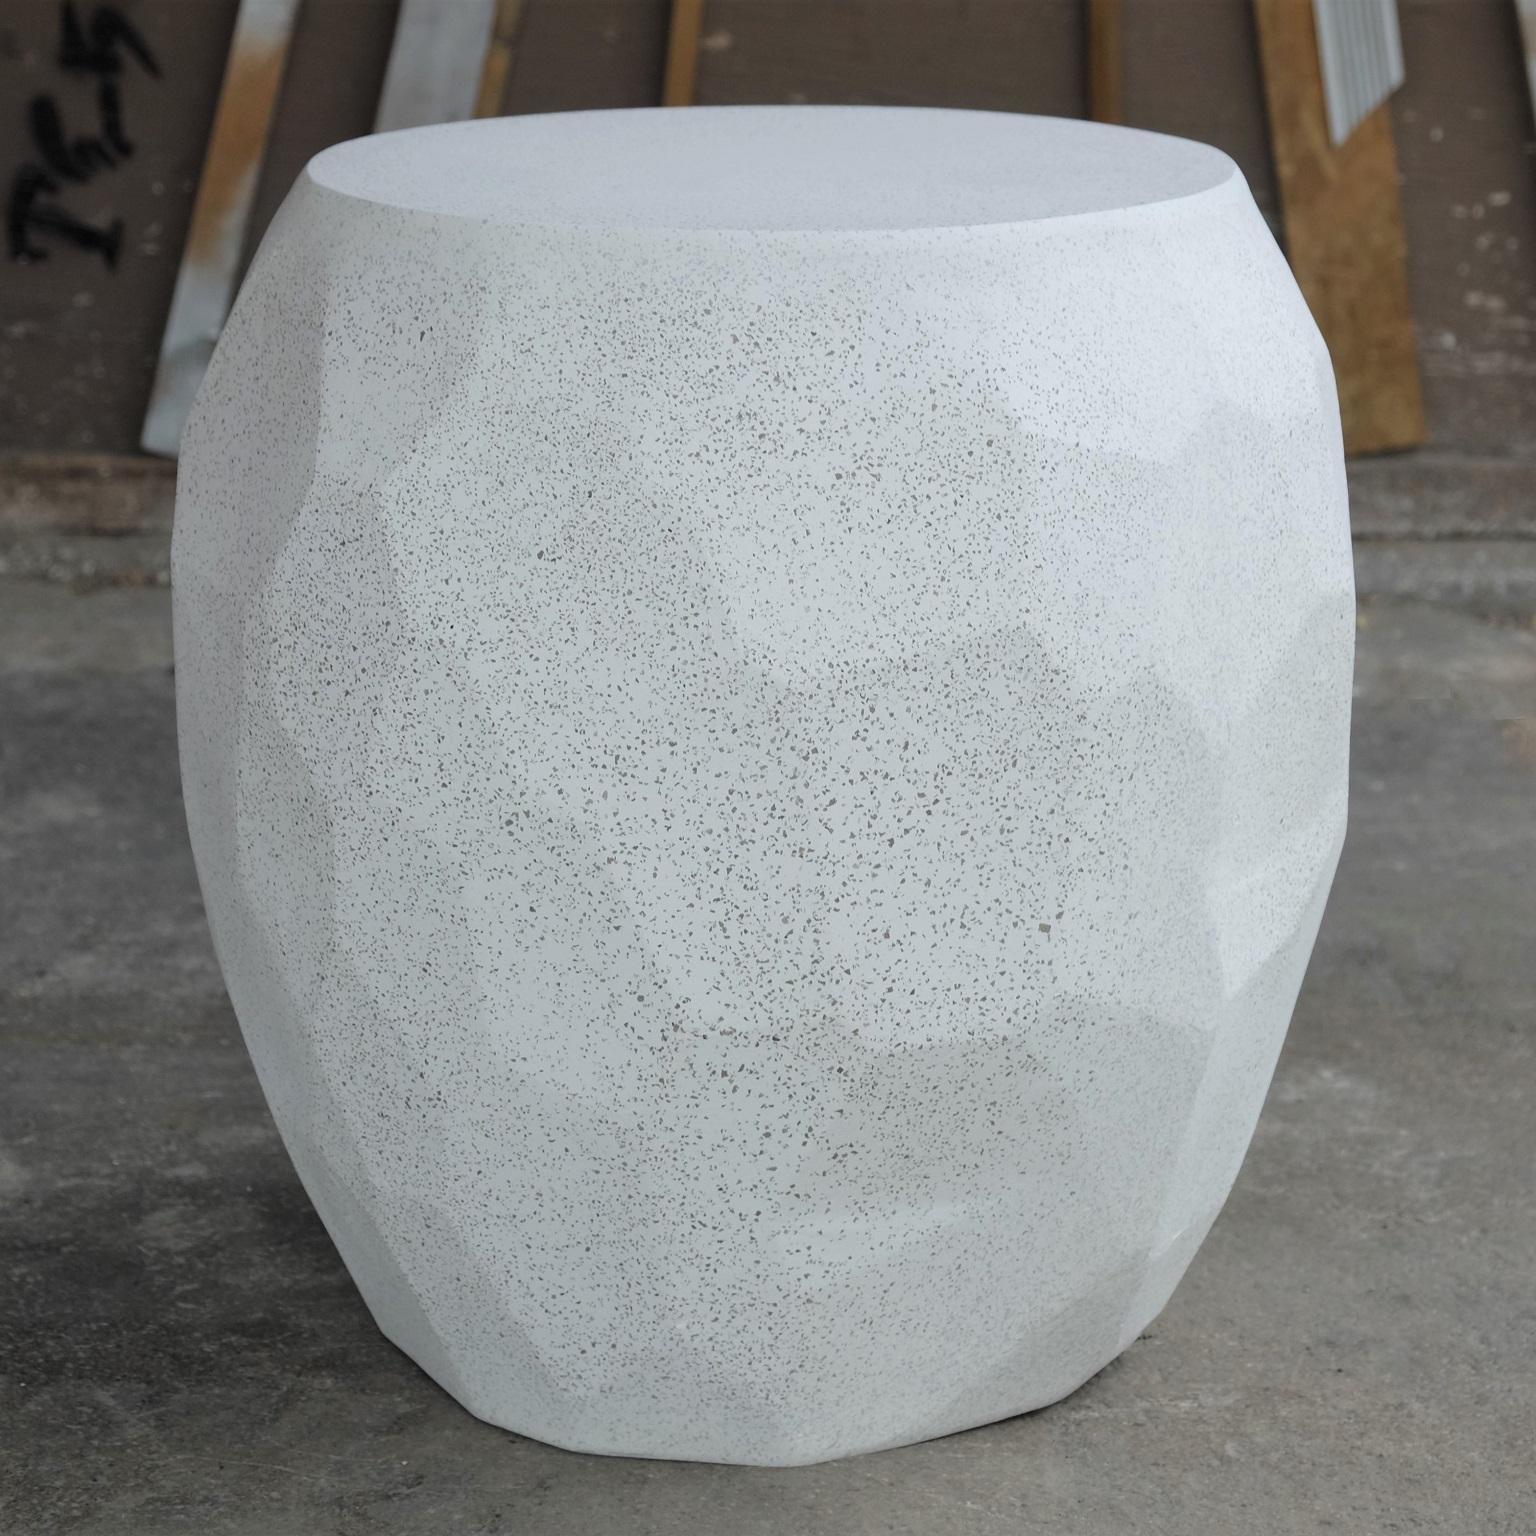 Prehistory manifested in the contemporary era. Its surface reminiscent of lithic reduction, the Facet calls back to an era of simple stone forms and tools.

Dimensions: Diameter 20 in. (50.8 cm), height 21 in. (53.3 cm), weight 25 lbs. (11.3 kg)
No